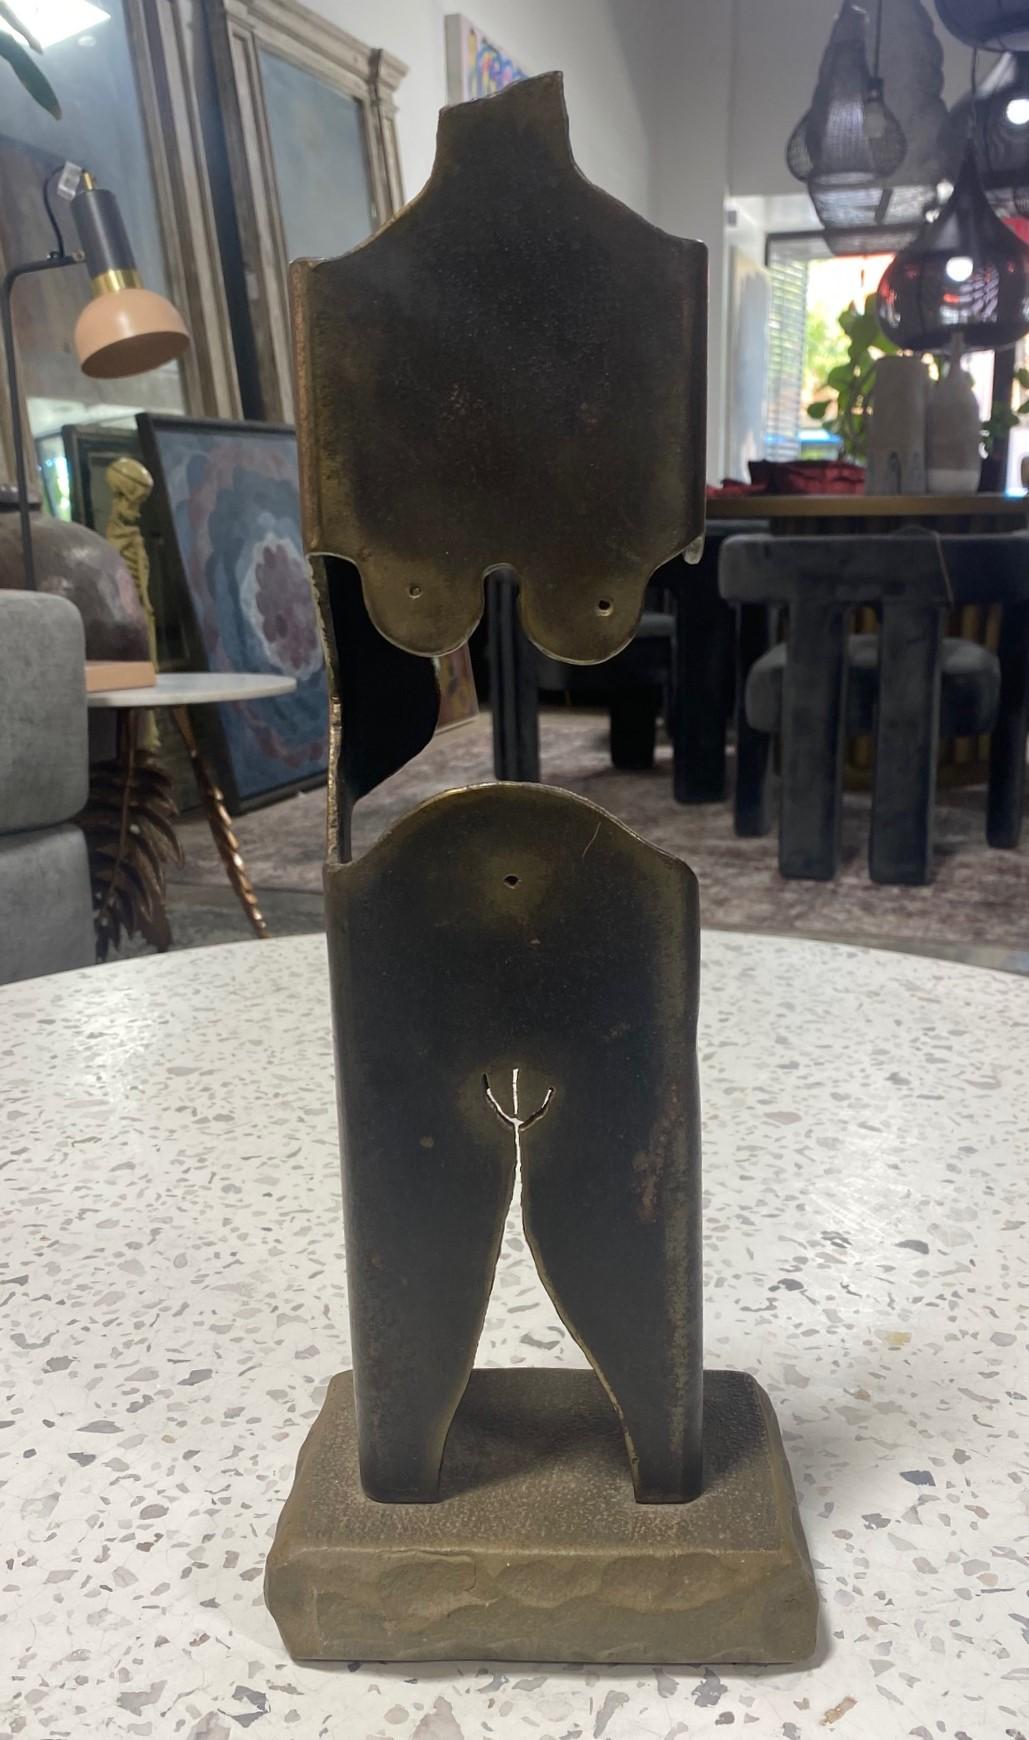 A fantastic, quite whimsical, engaging Mid-century Modern abstract female nude sculpture by New York artist Albert Leon Wilson.  This is one of the best pieces we have come across of his work.  

Wilson was born in 1920 in Jamaica, New York.  In the